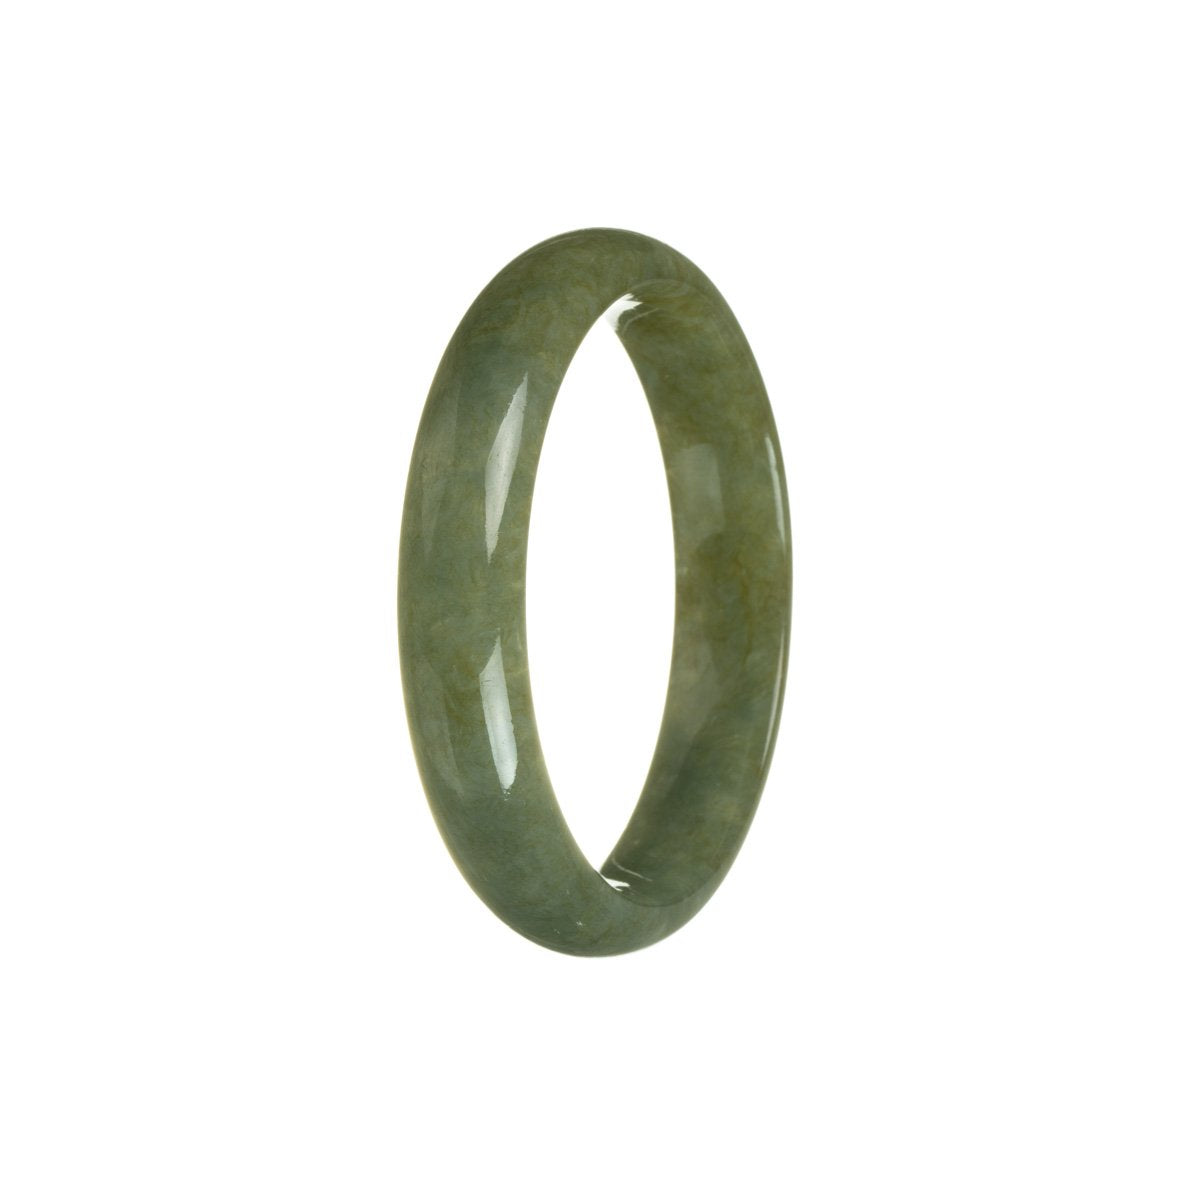 An exquisite brownish green jade bangle with a half moon design, certified as Grade A quality by MAYS™.